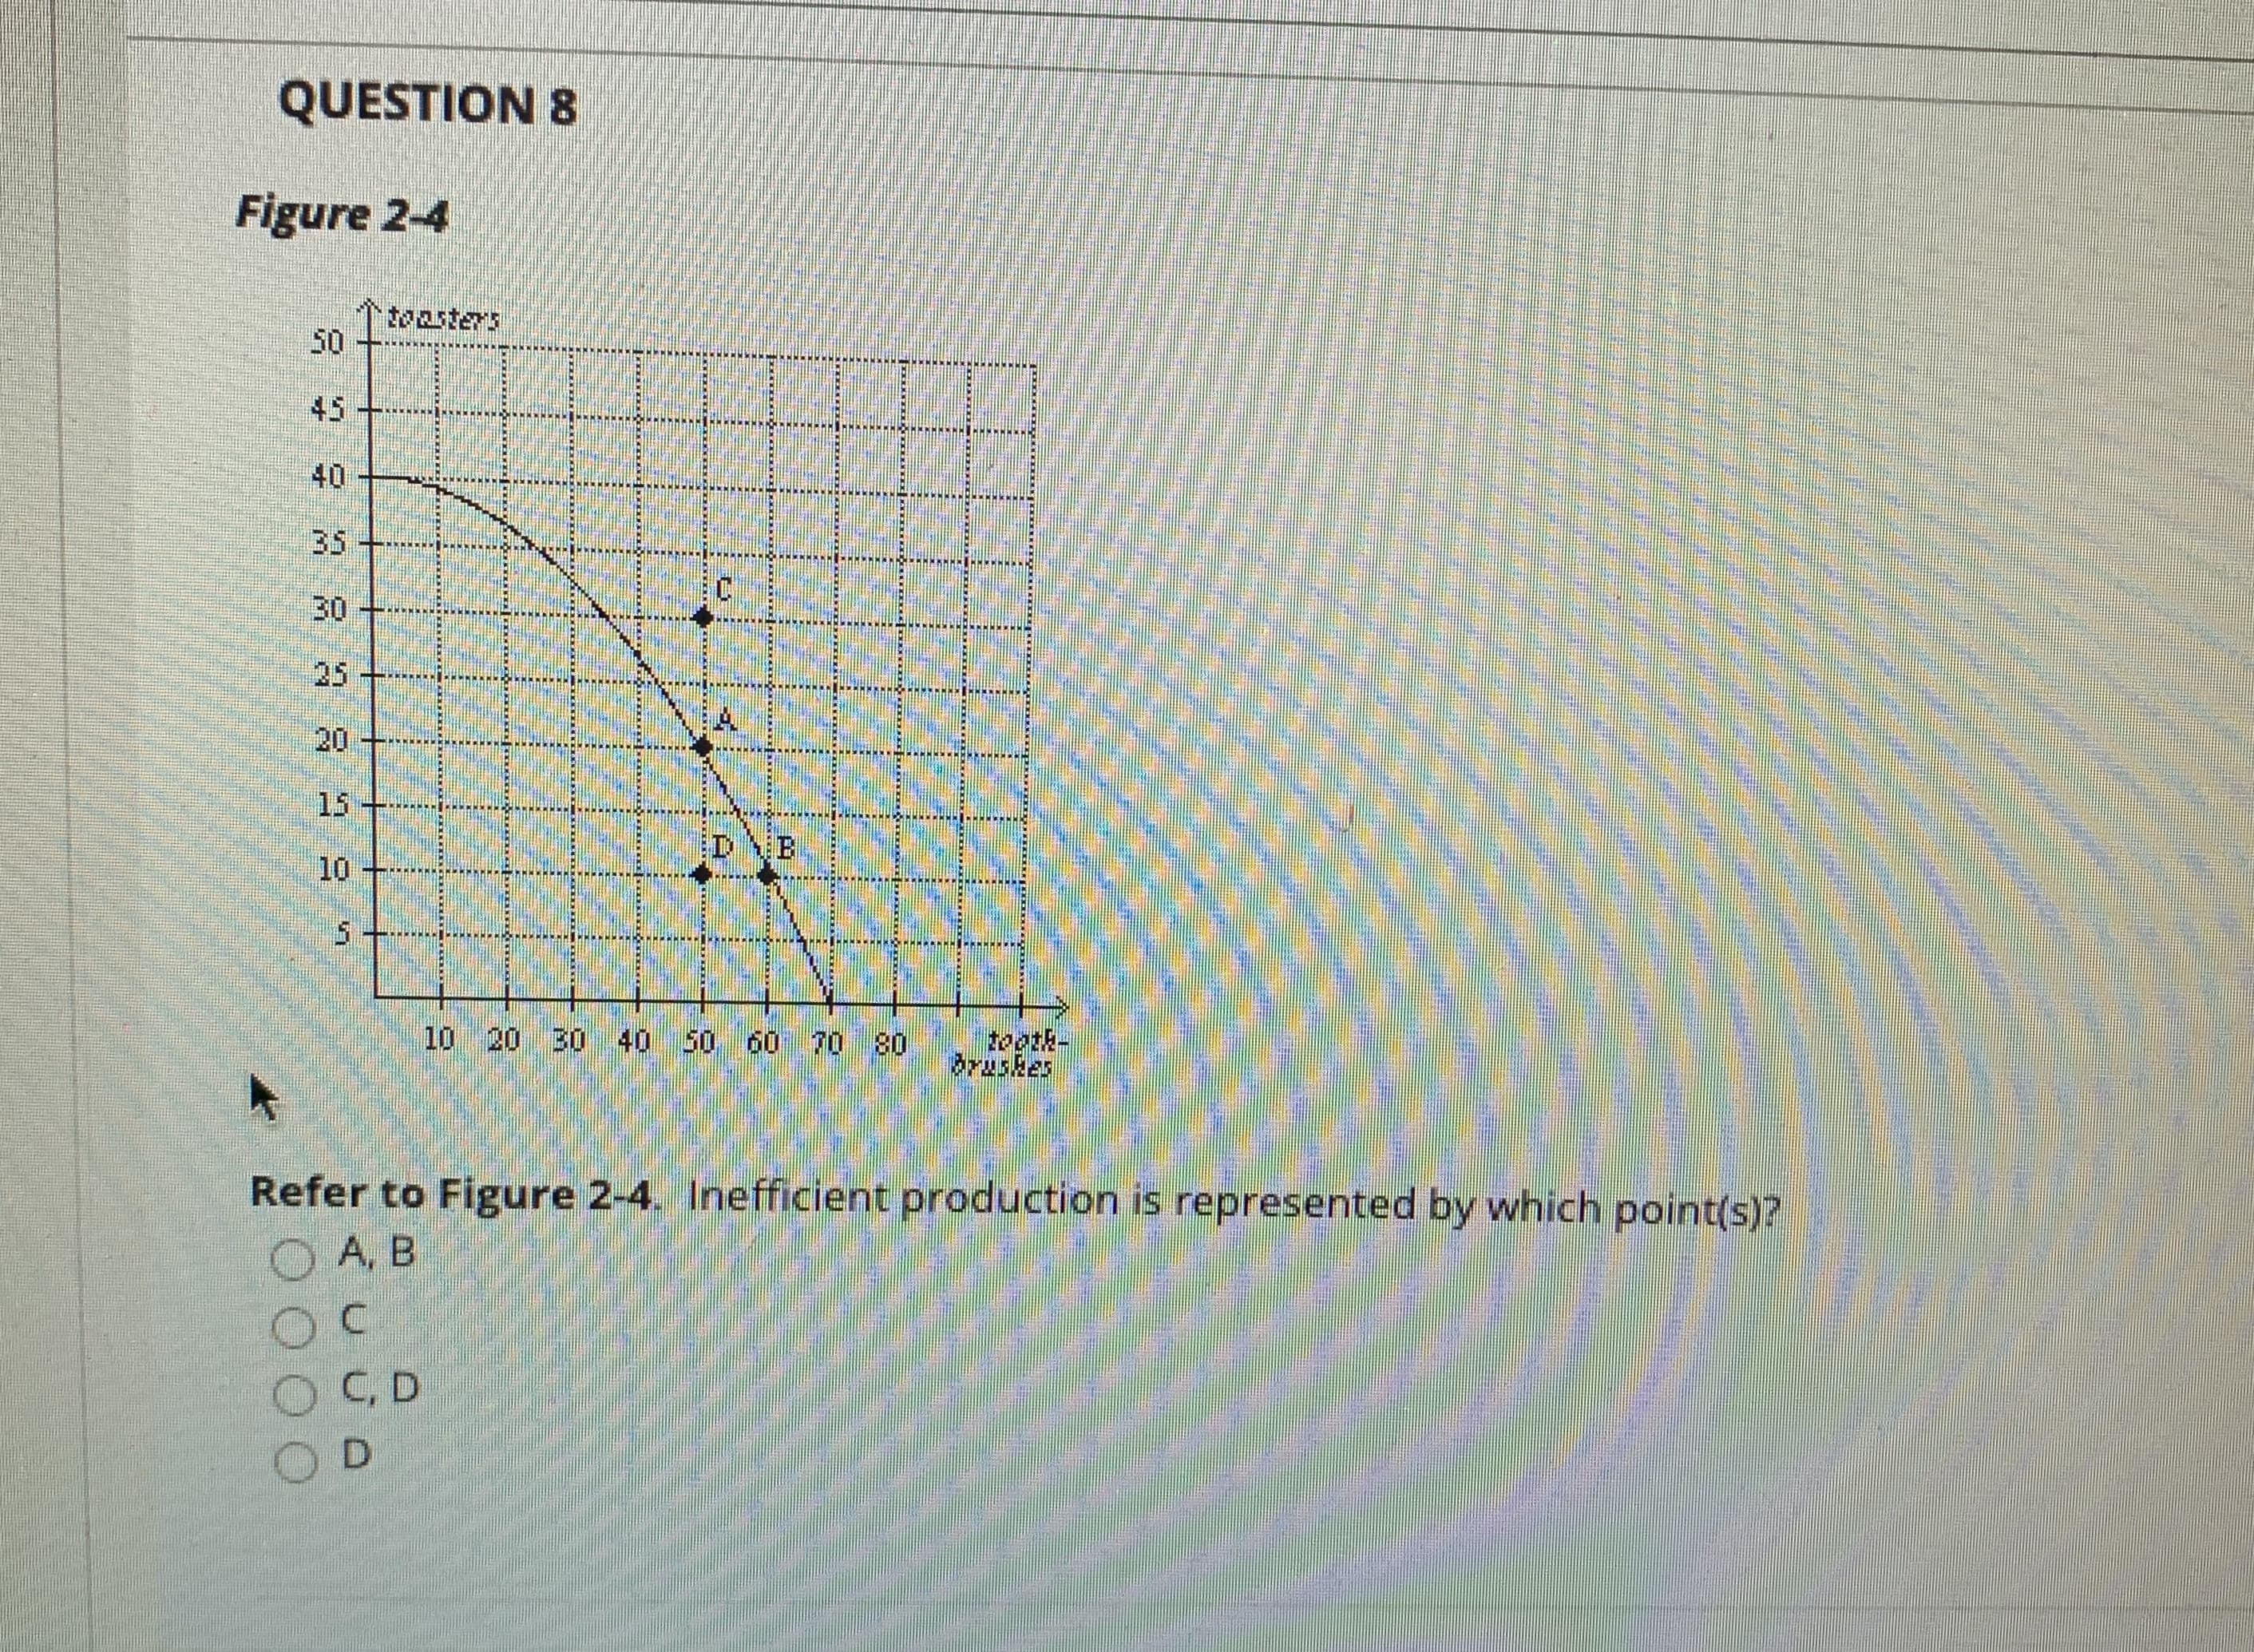 Refer to Figure 2-4. Inefficient production is represented by which point(s)?
